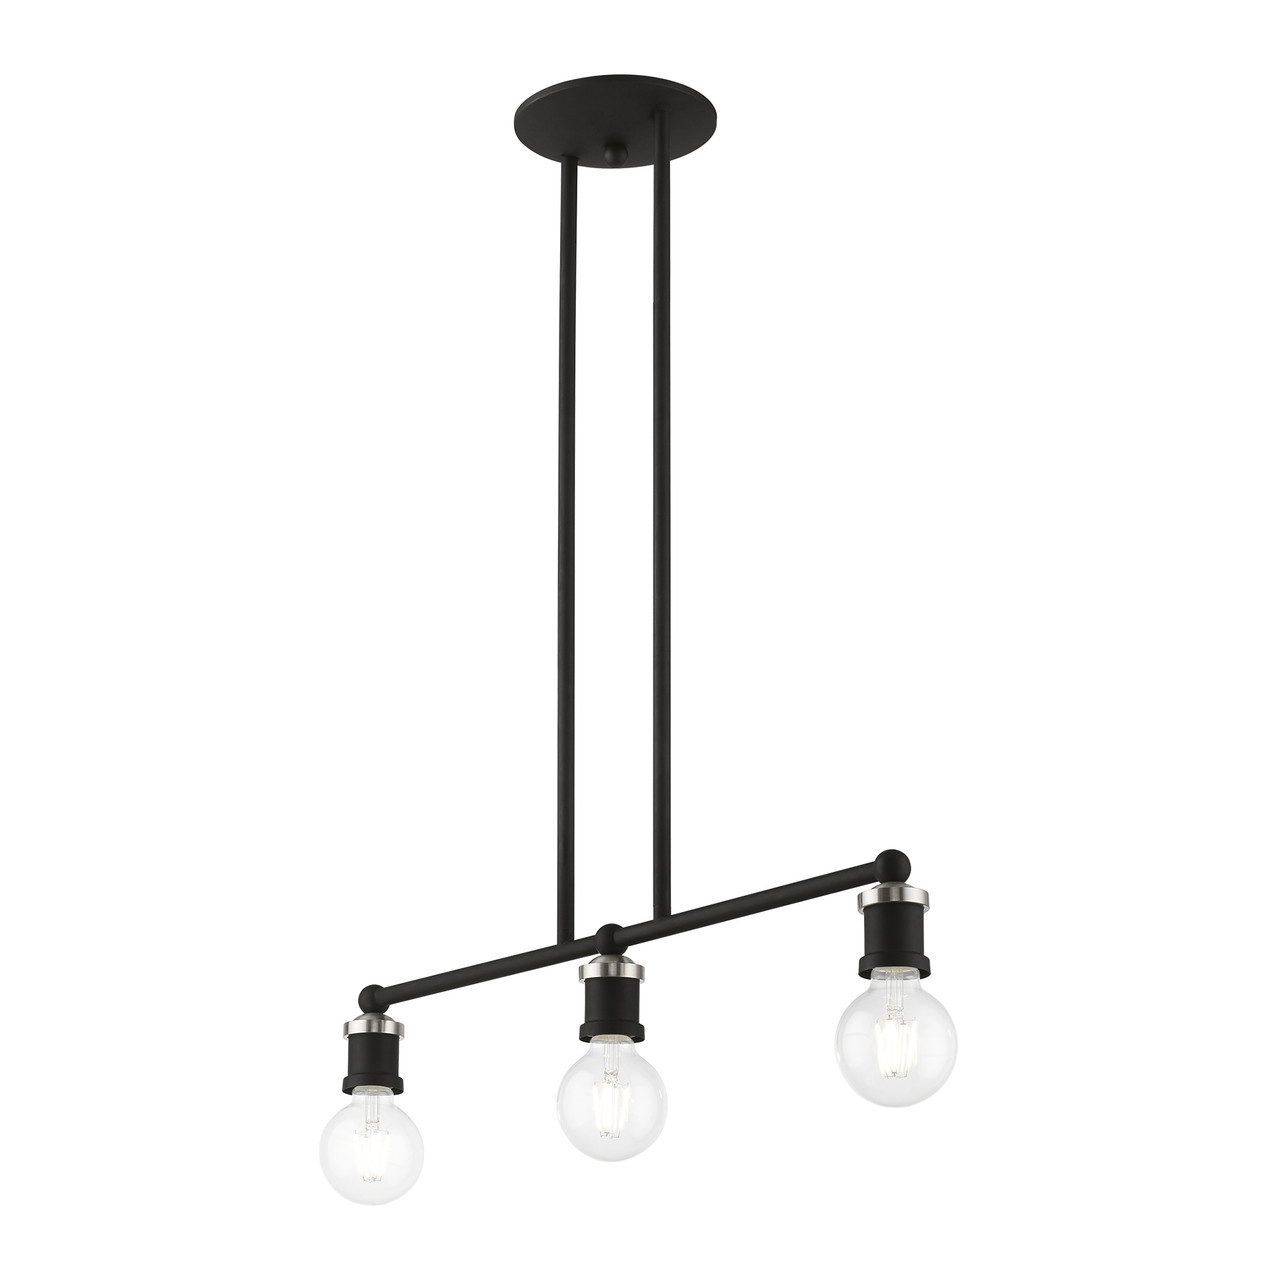 LIVEX LIGHTING 47163-04 3 Light Black with Brushed Nickel Accents Linear Chandelier